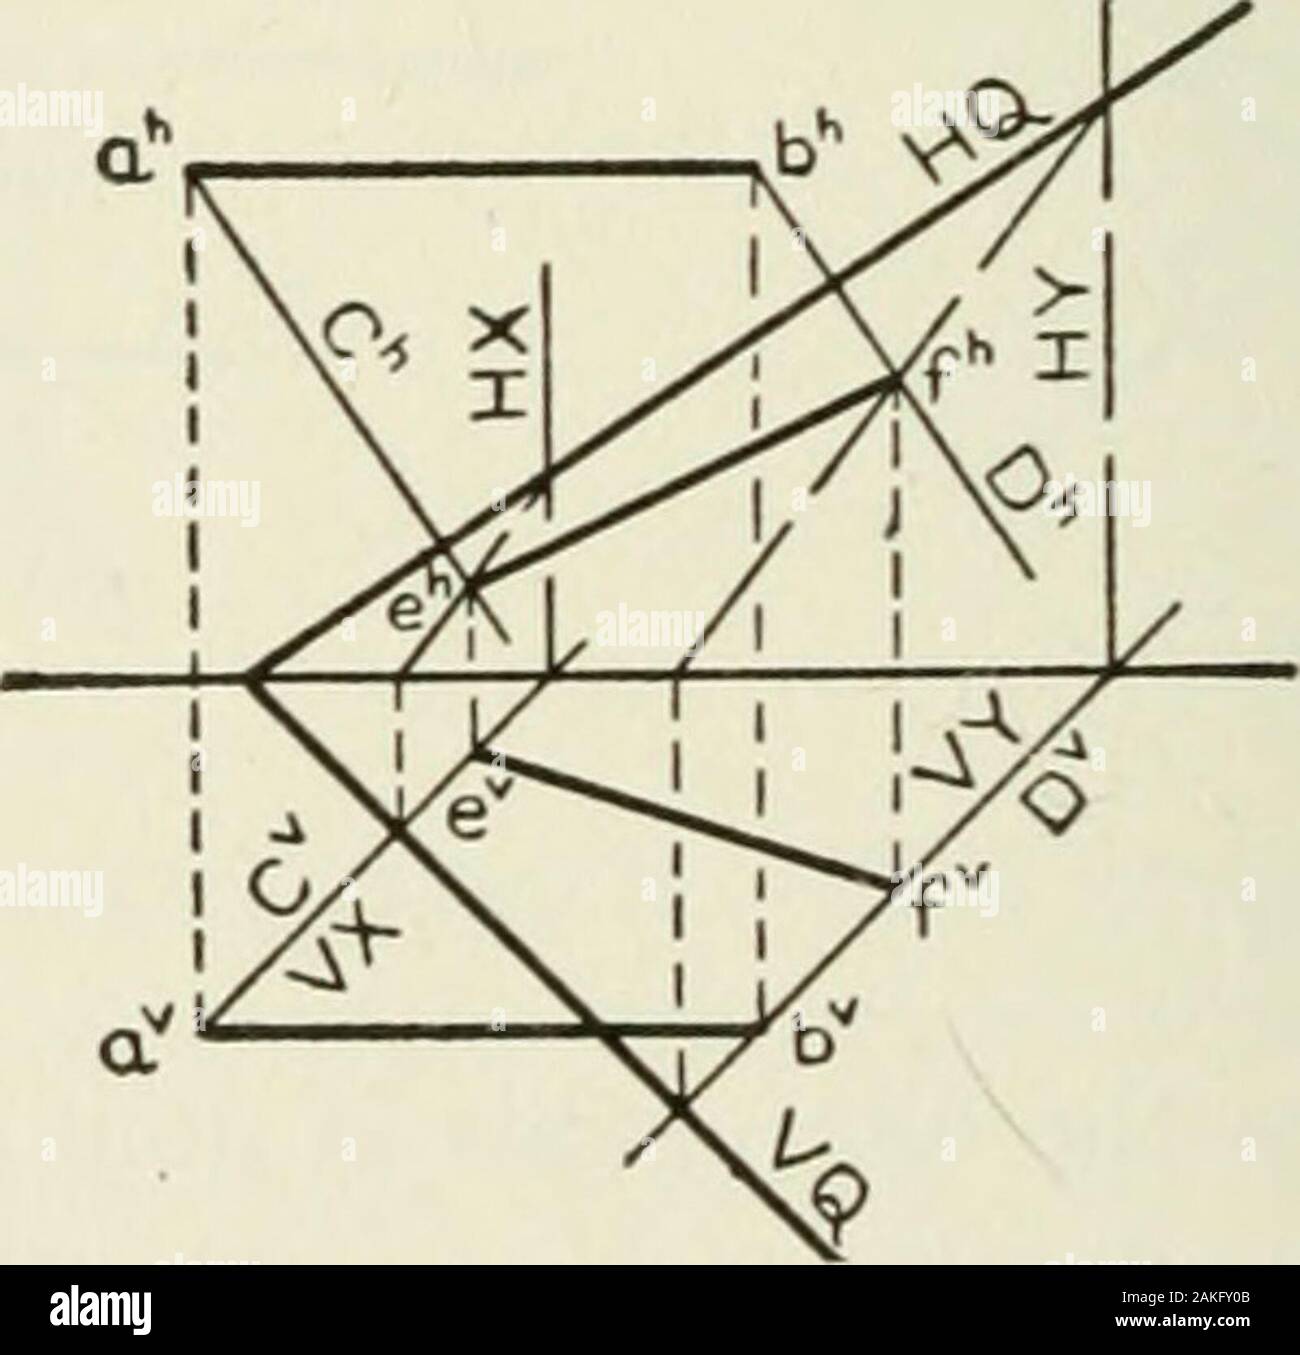 Descriptive geometry . rojections are, however, usuallyconsidered a part of the problem, and are obtained bj project-ing from the profile view. 106 DESCRIPTIVE GEOMETRY [XII, § 121 121. The Projection of a Point or Line on a Plane. The projection of a point on a plane is the foot of the perpendiculardropped from the point to the plane. This definition is notconfined to the coordinate planes of projection, but applies toany plane in space. However, when a point is projected on tosome oblique plane represented by its traces on H and V, theprojection must in turn be represented by its projections Stock Photo